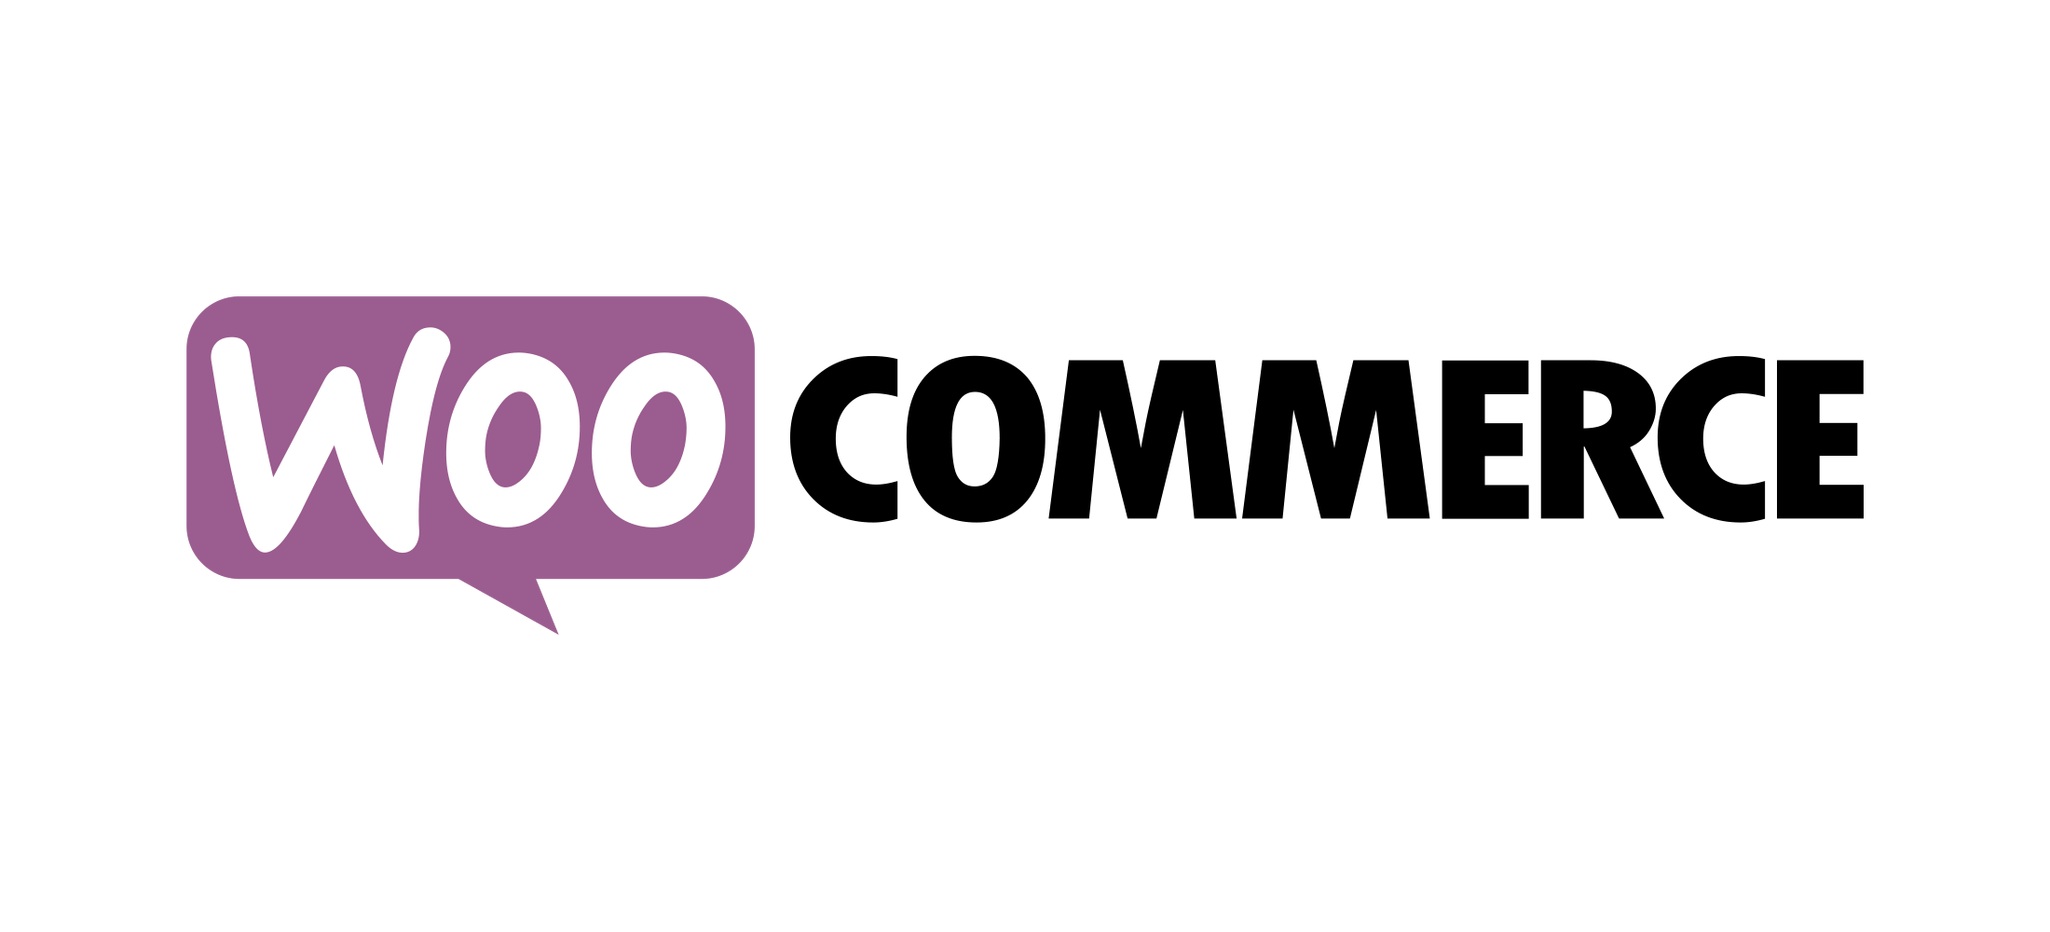 WooCommerce Explores the Possibilities and Challenges for E-Commerce in the Gutenberg Era